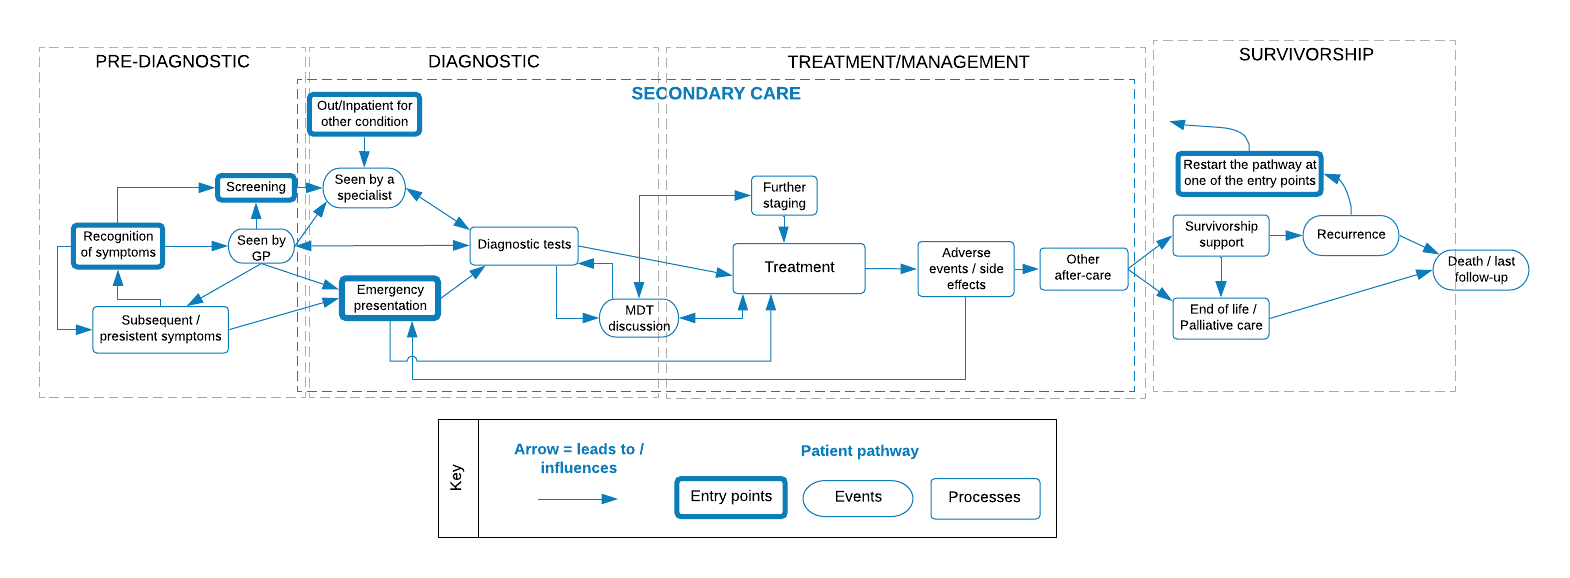 A flowchart depicting the basic cancer journey